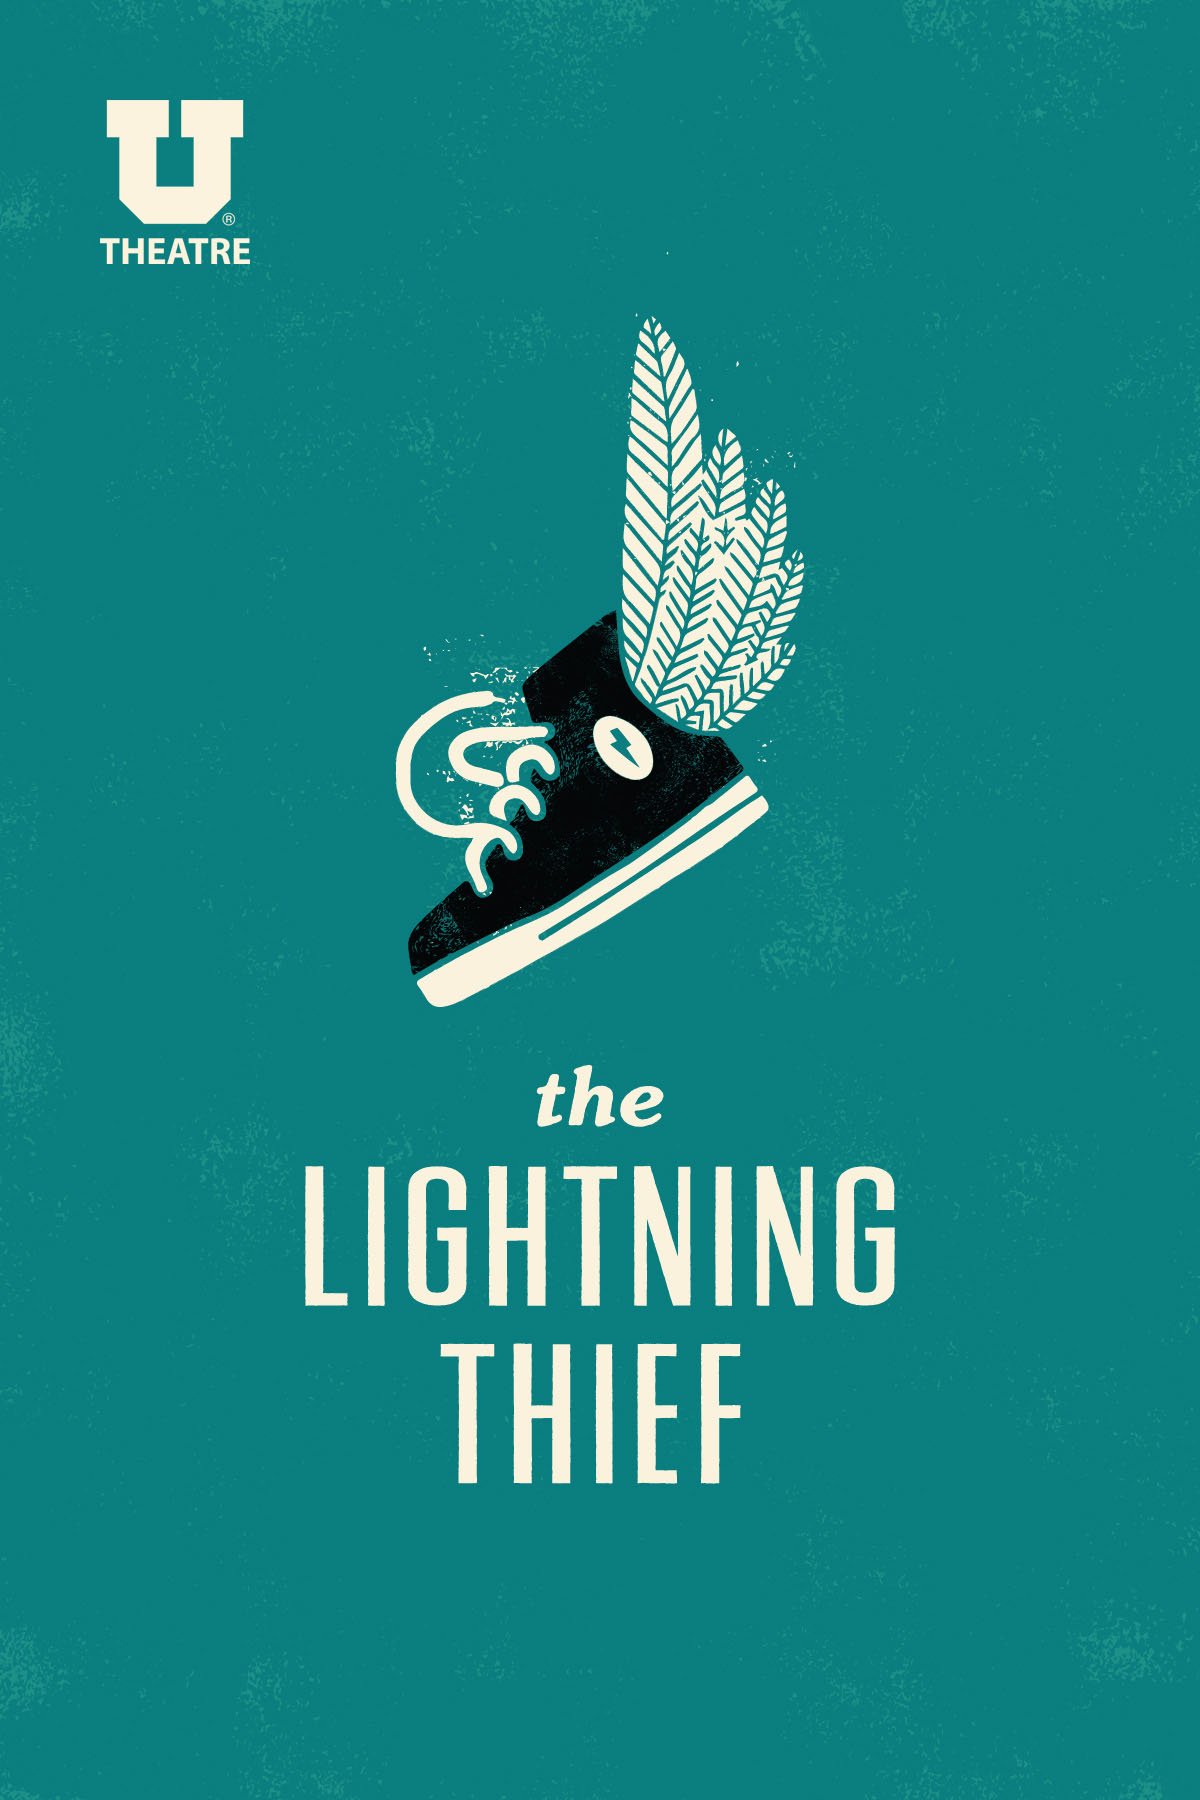 The Lightning Thief  Fairfield University Quick Center for the Arts